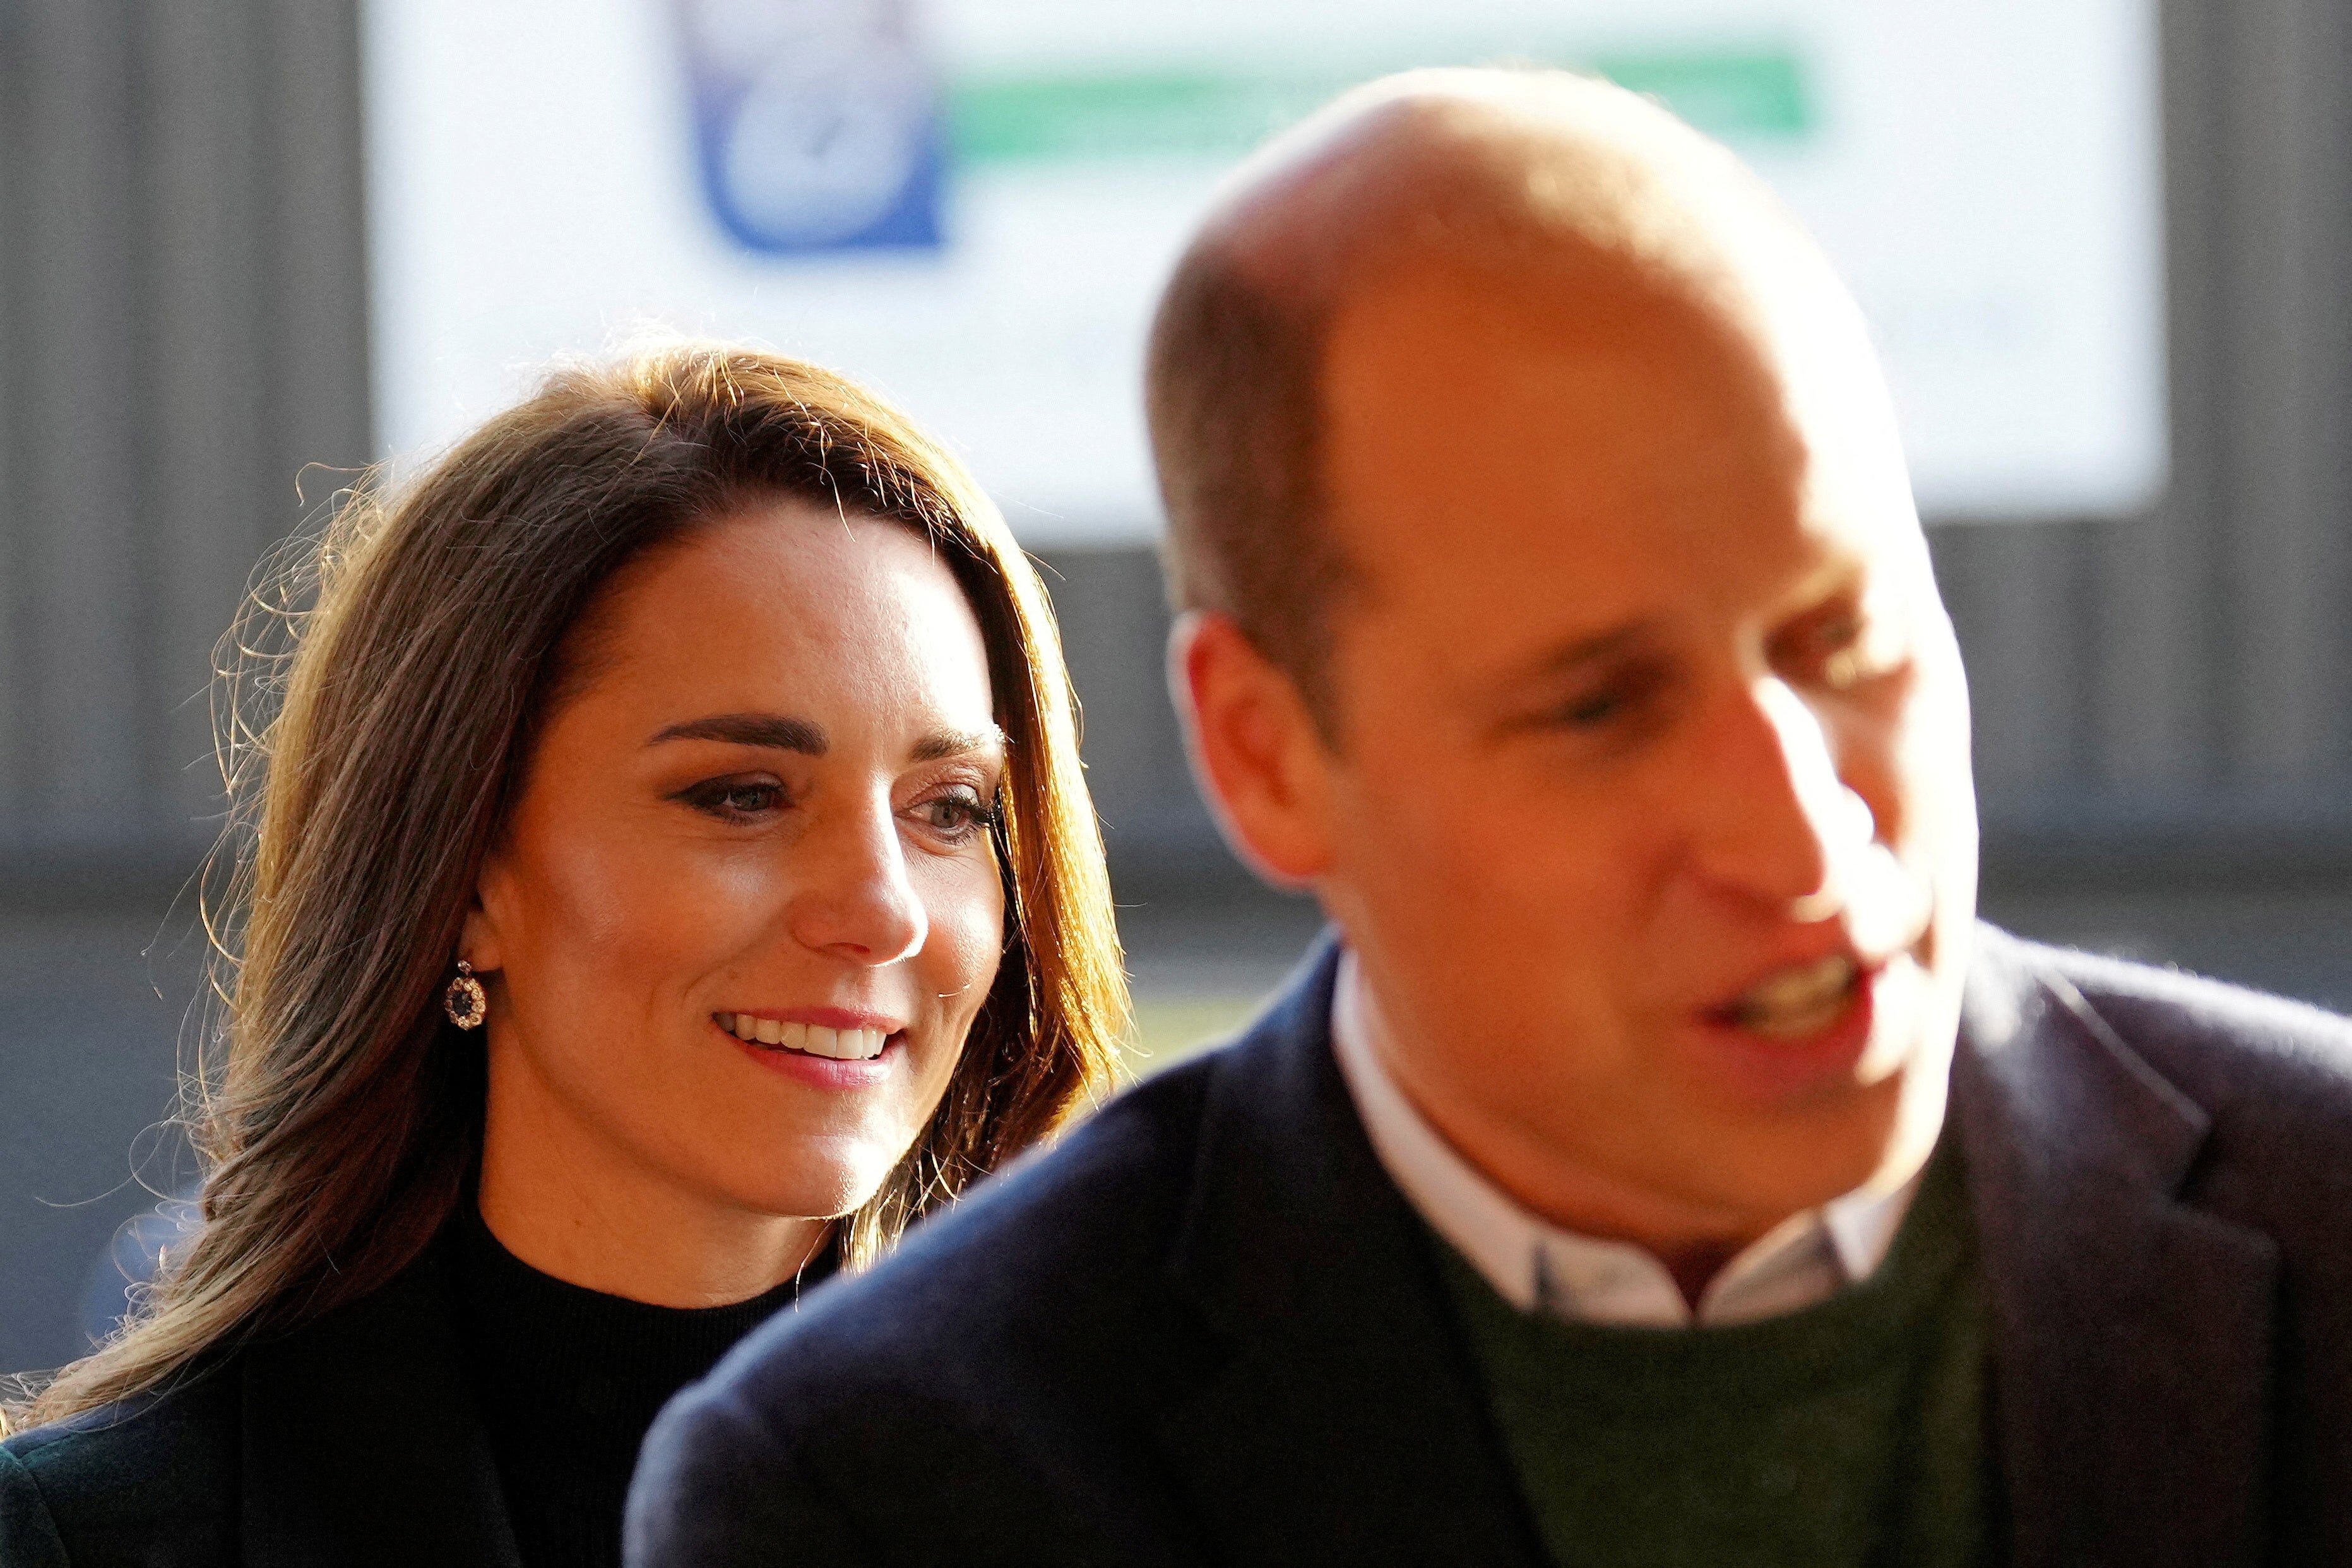 Prince William learned of his wife Kate’s cancer diagnosis before he was due to attend a memorial service